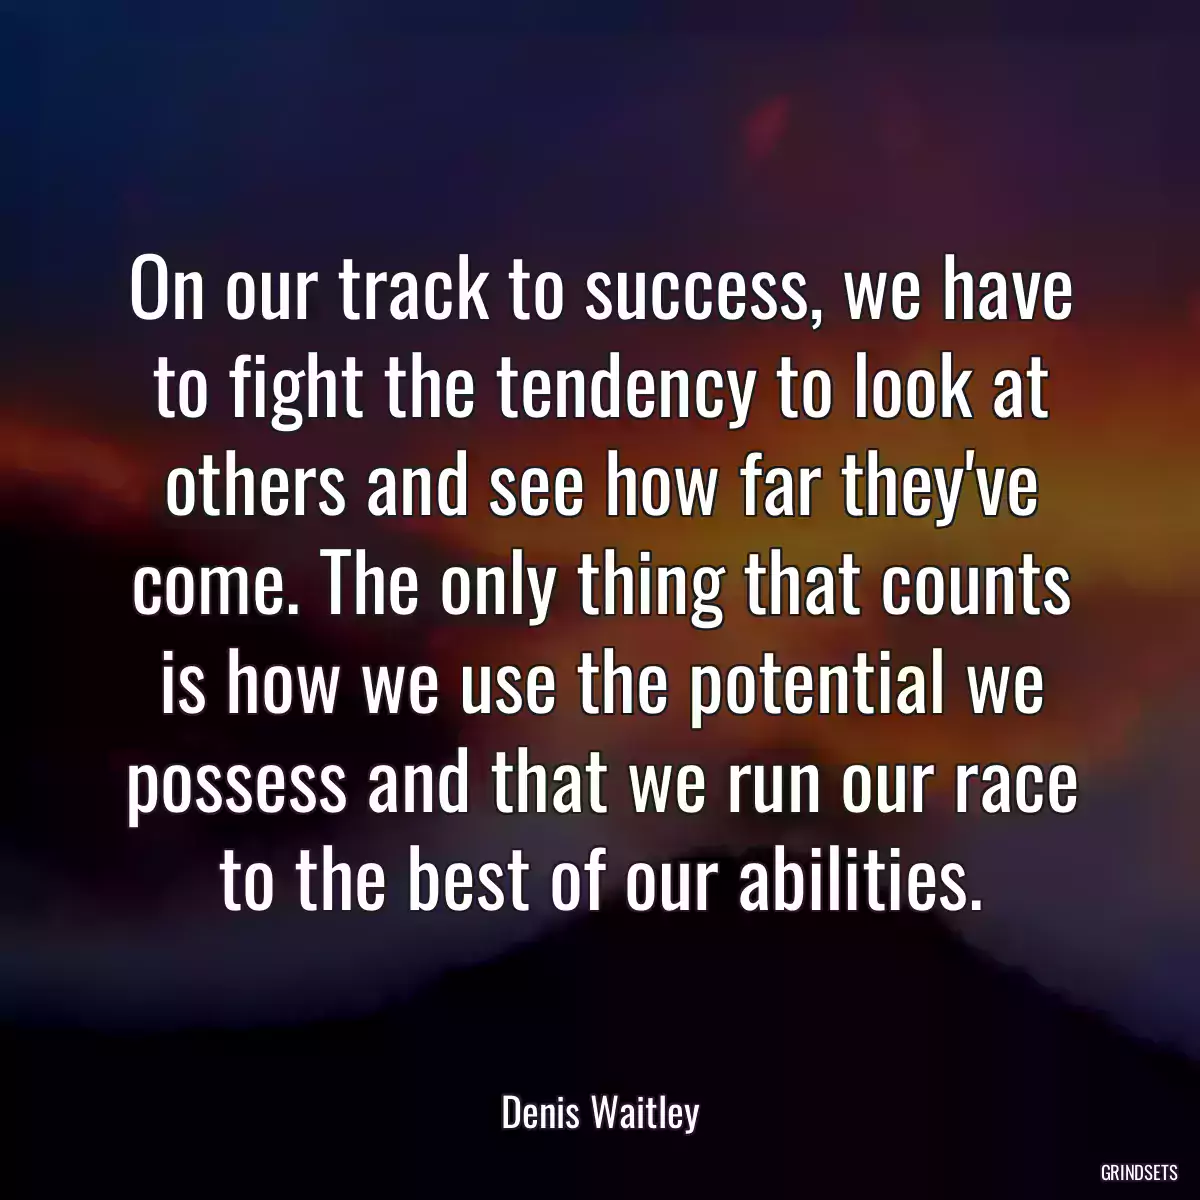 On our track to success, we have to fight the tendency to look at others and see how far they\'ve come. The only thing that counts is how we use the potential we possess and that we run our race to the best of our abilities.